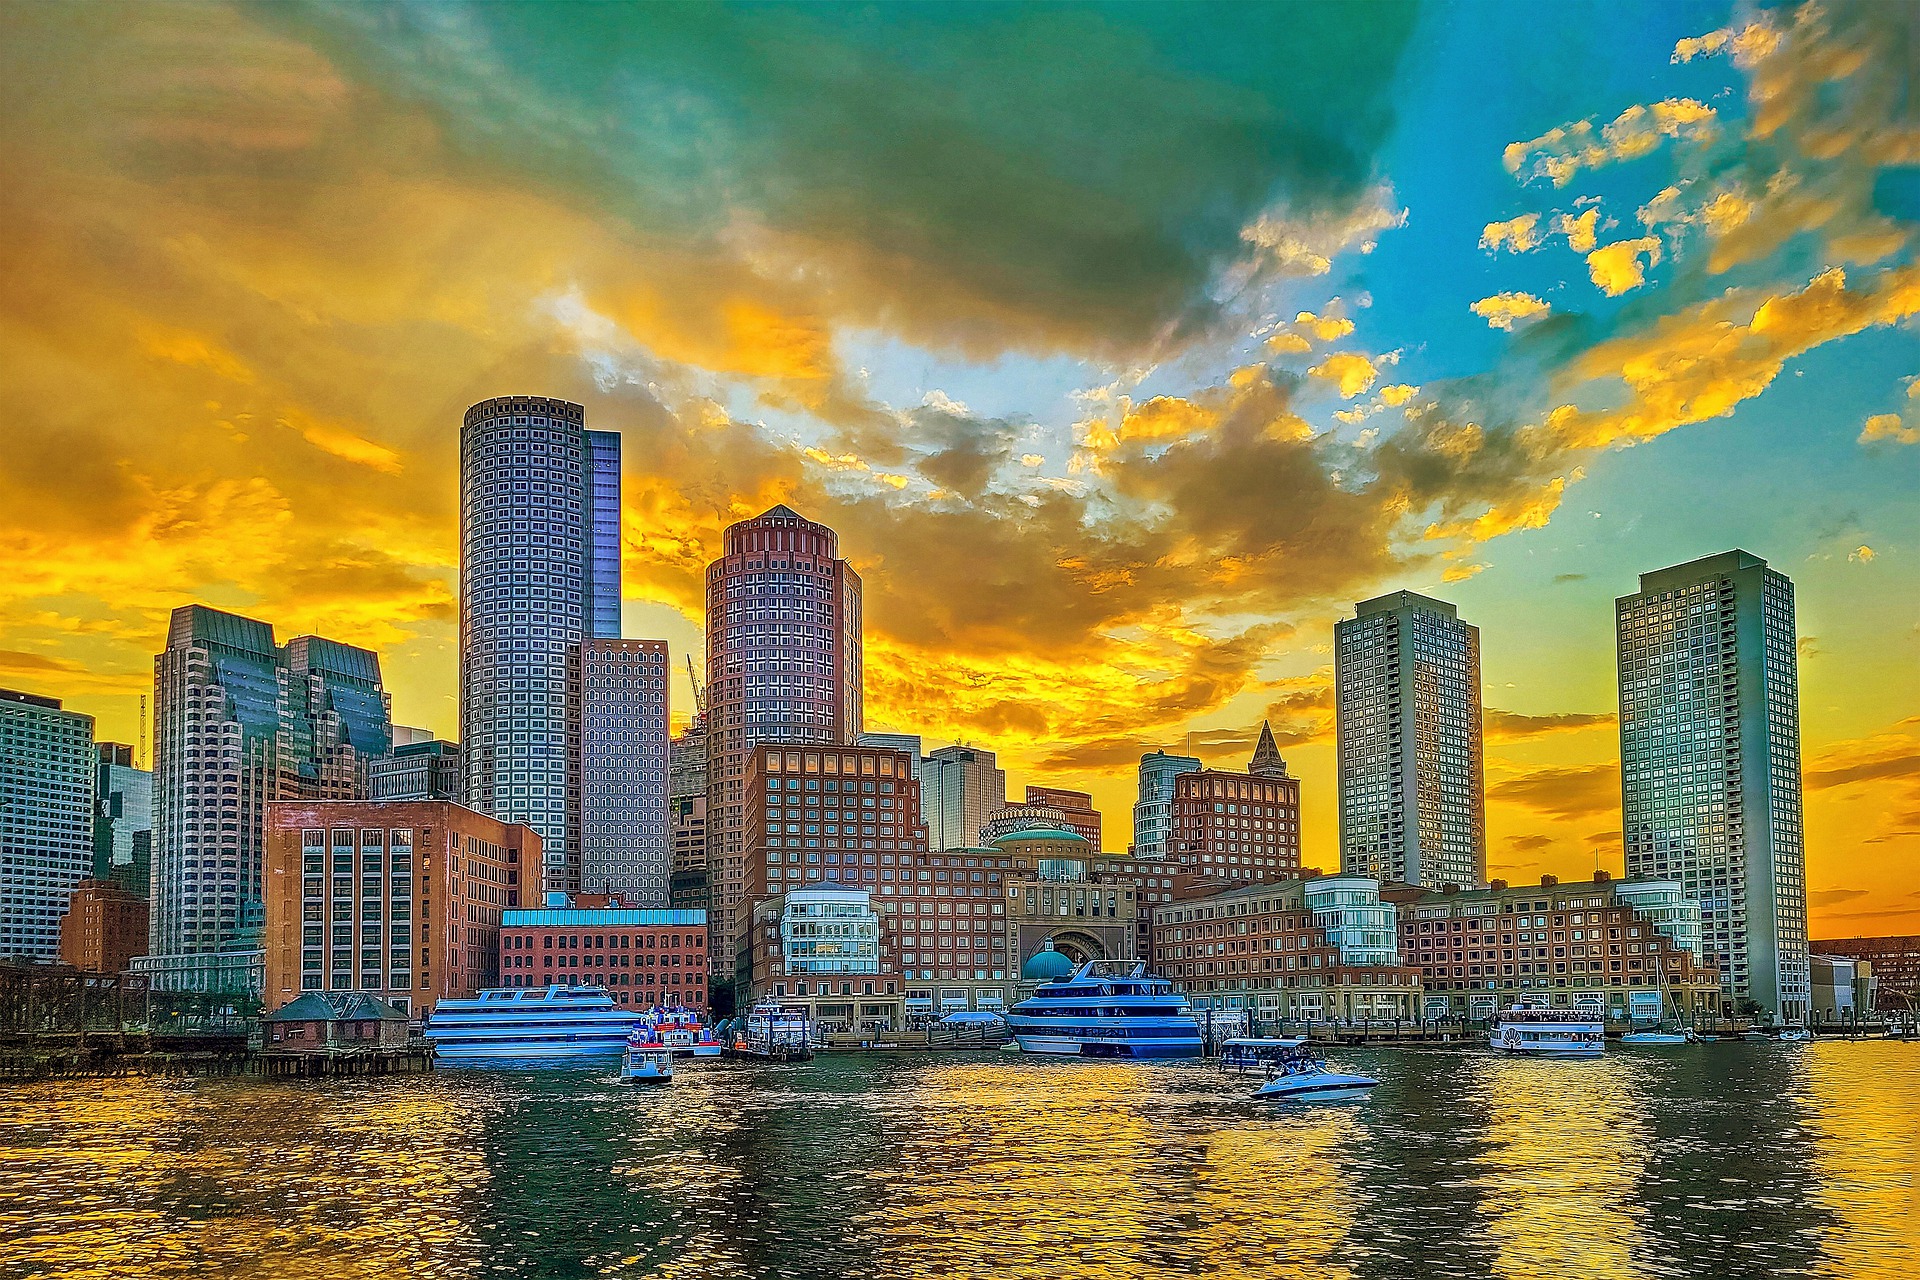 Buying an Airbnb Vacation Rental in Boston